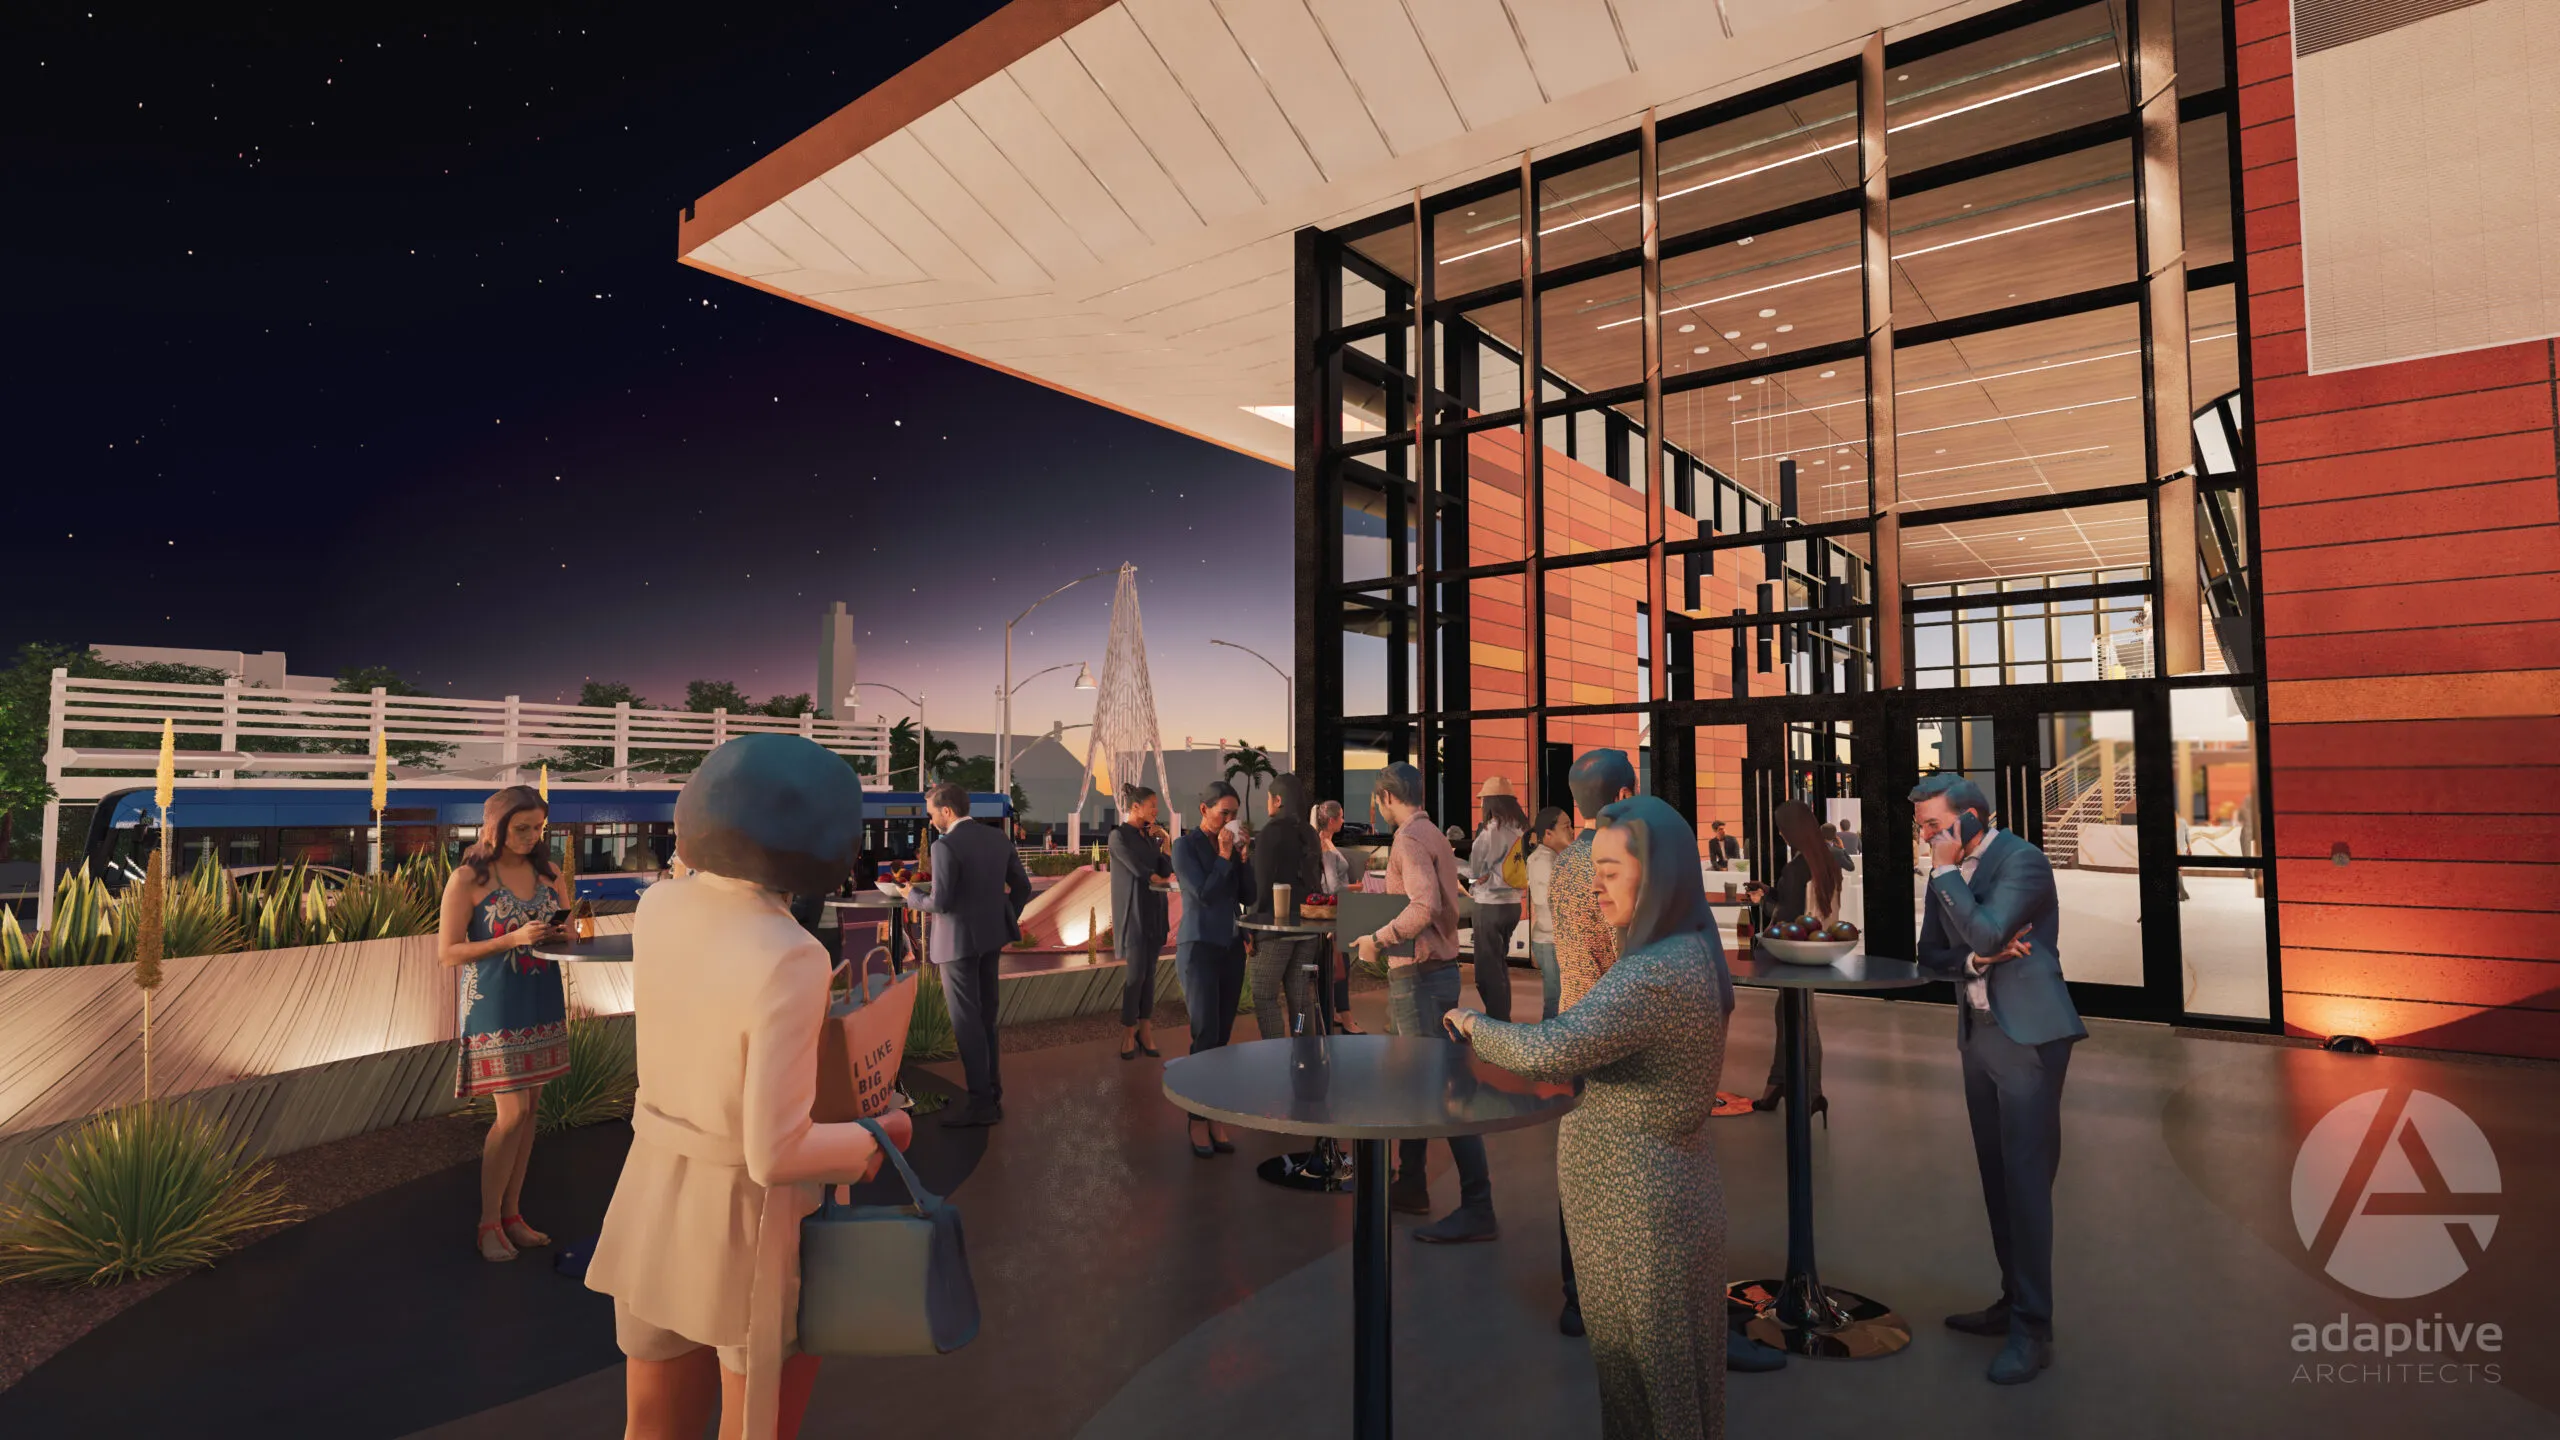 rendering of the courtyard with an event happening.